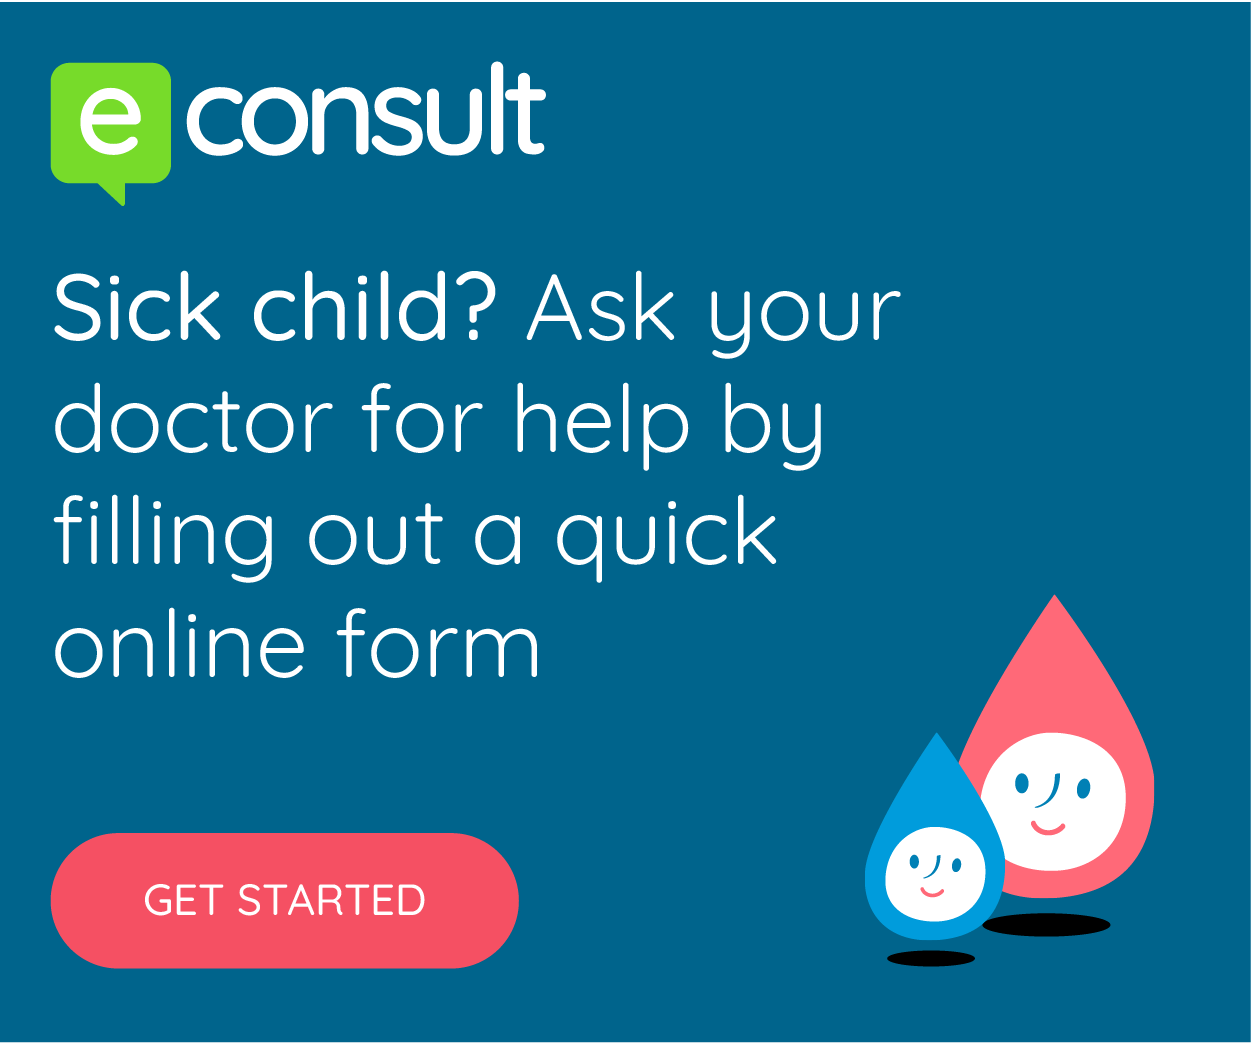 Contact your doctor online if you have a sick child